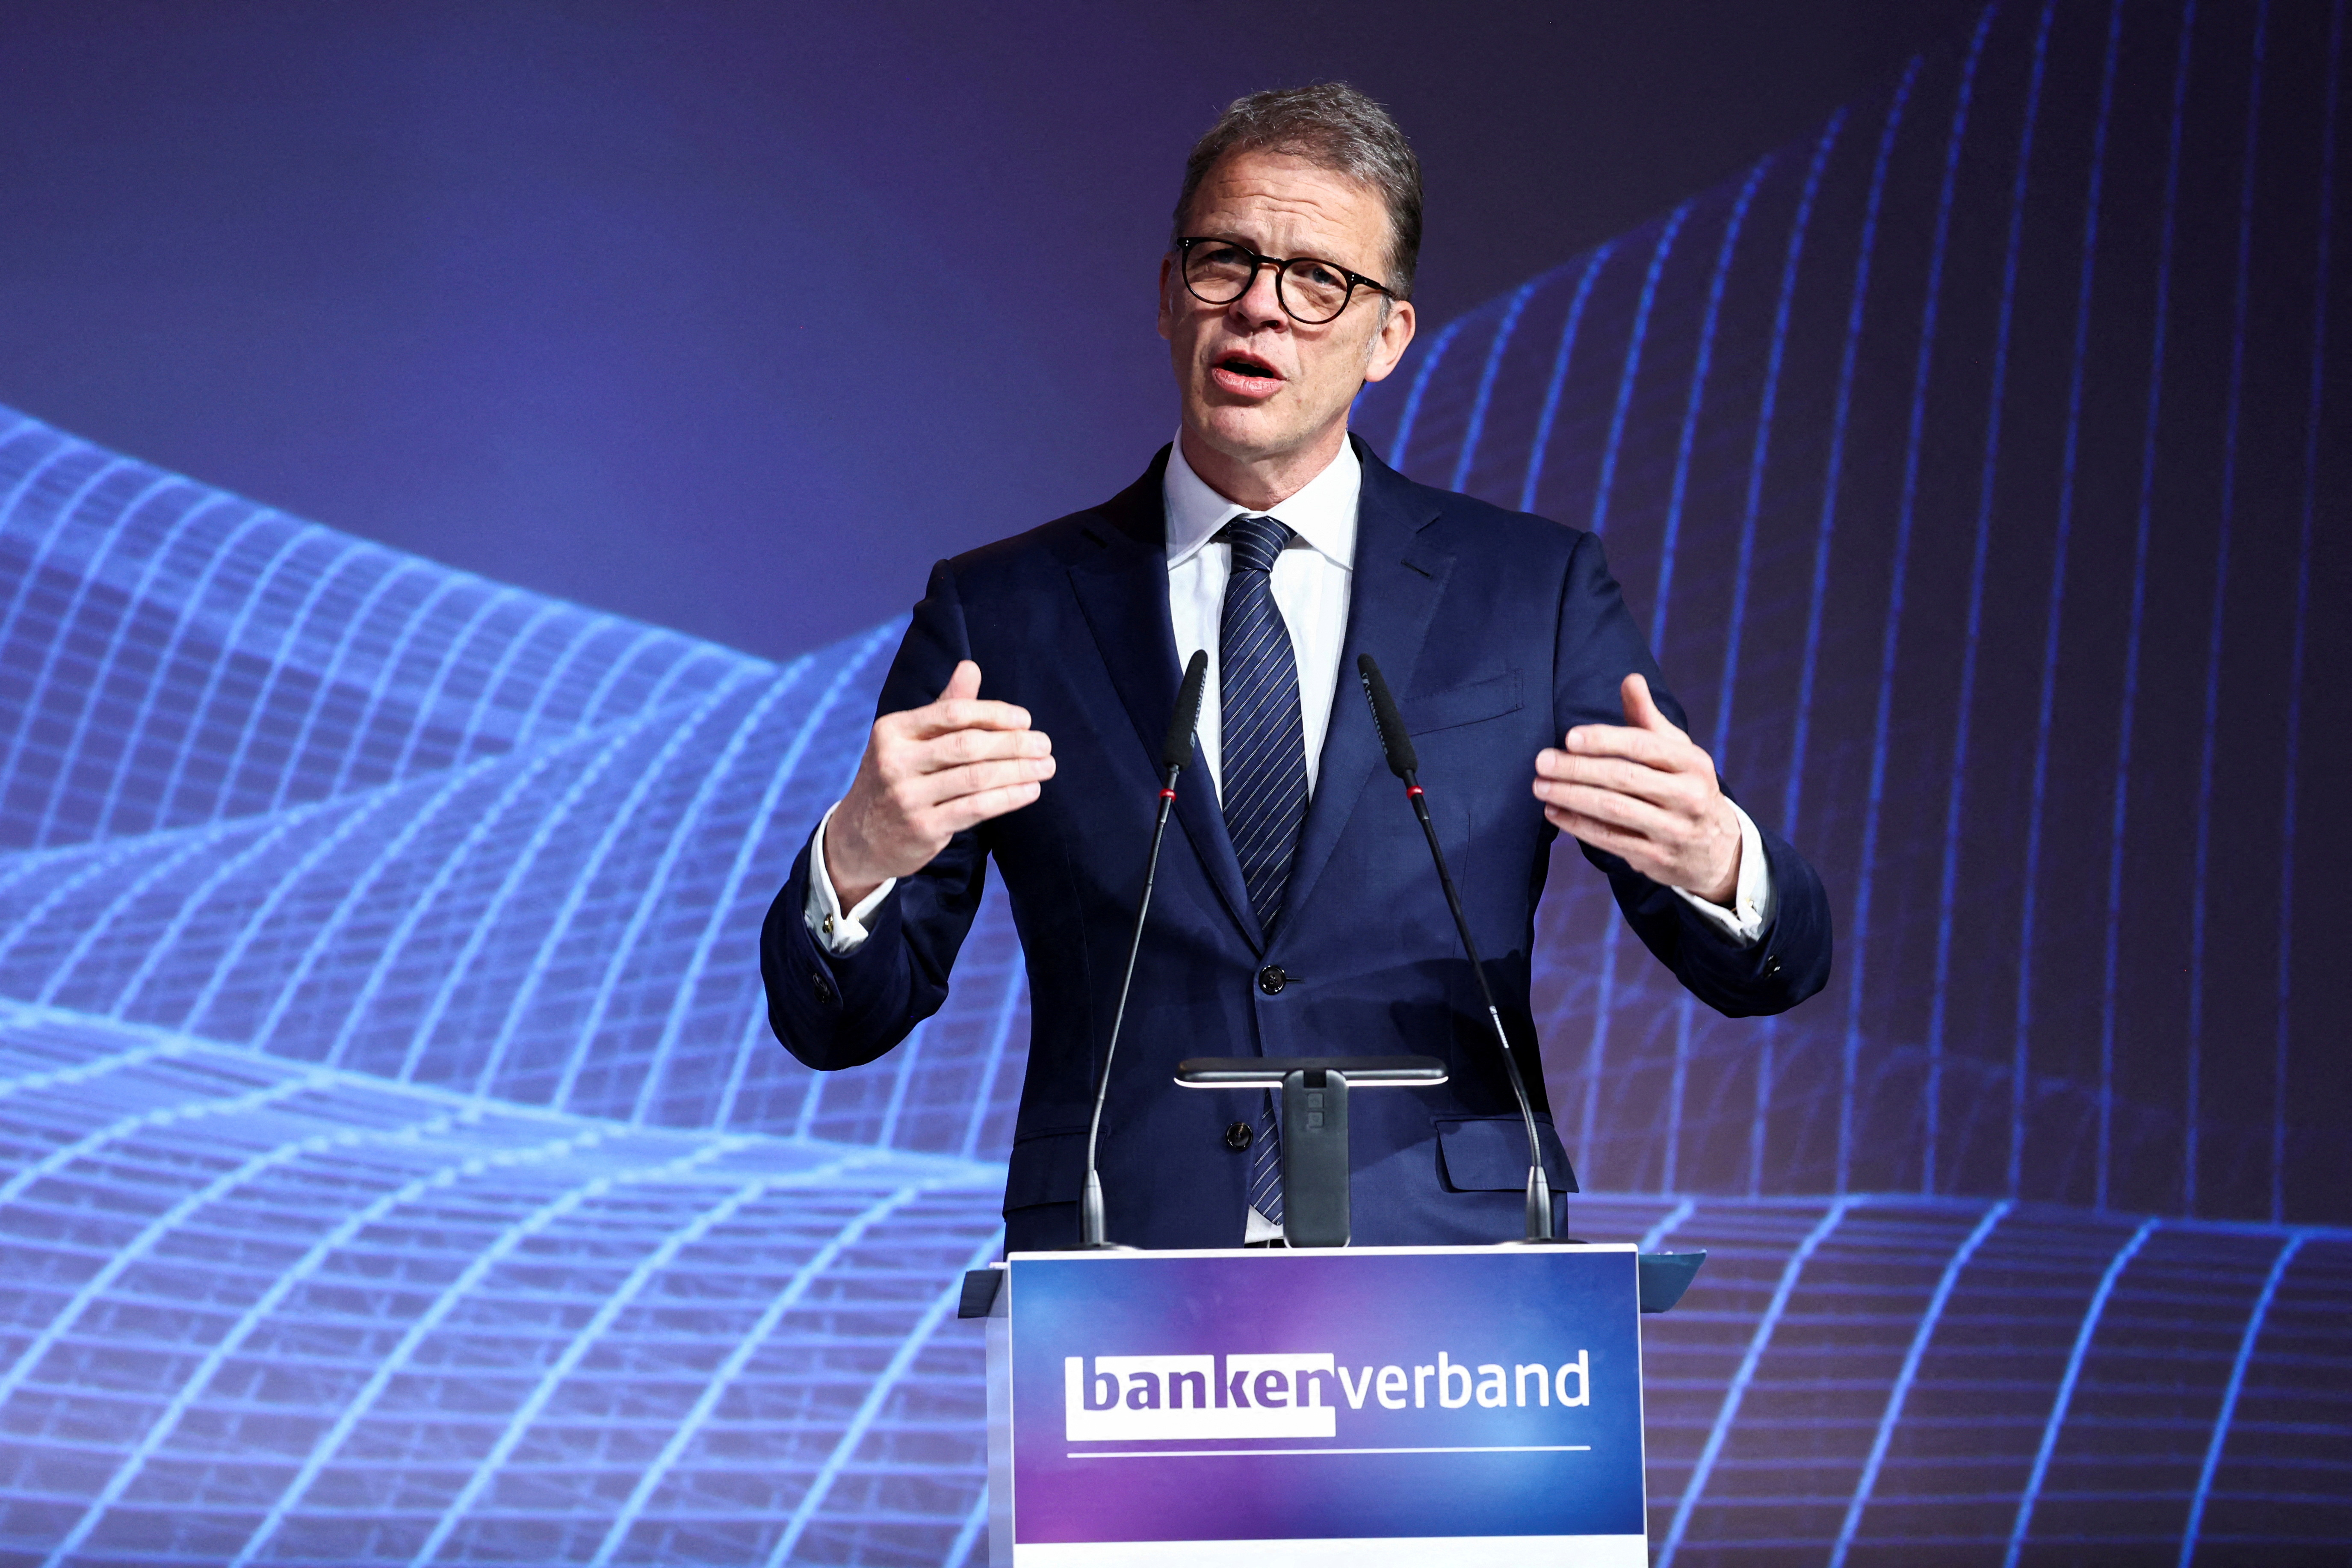 Deutsche Bank CEO Christian Sewing speaks at the sector's Banking Day in Berlin